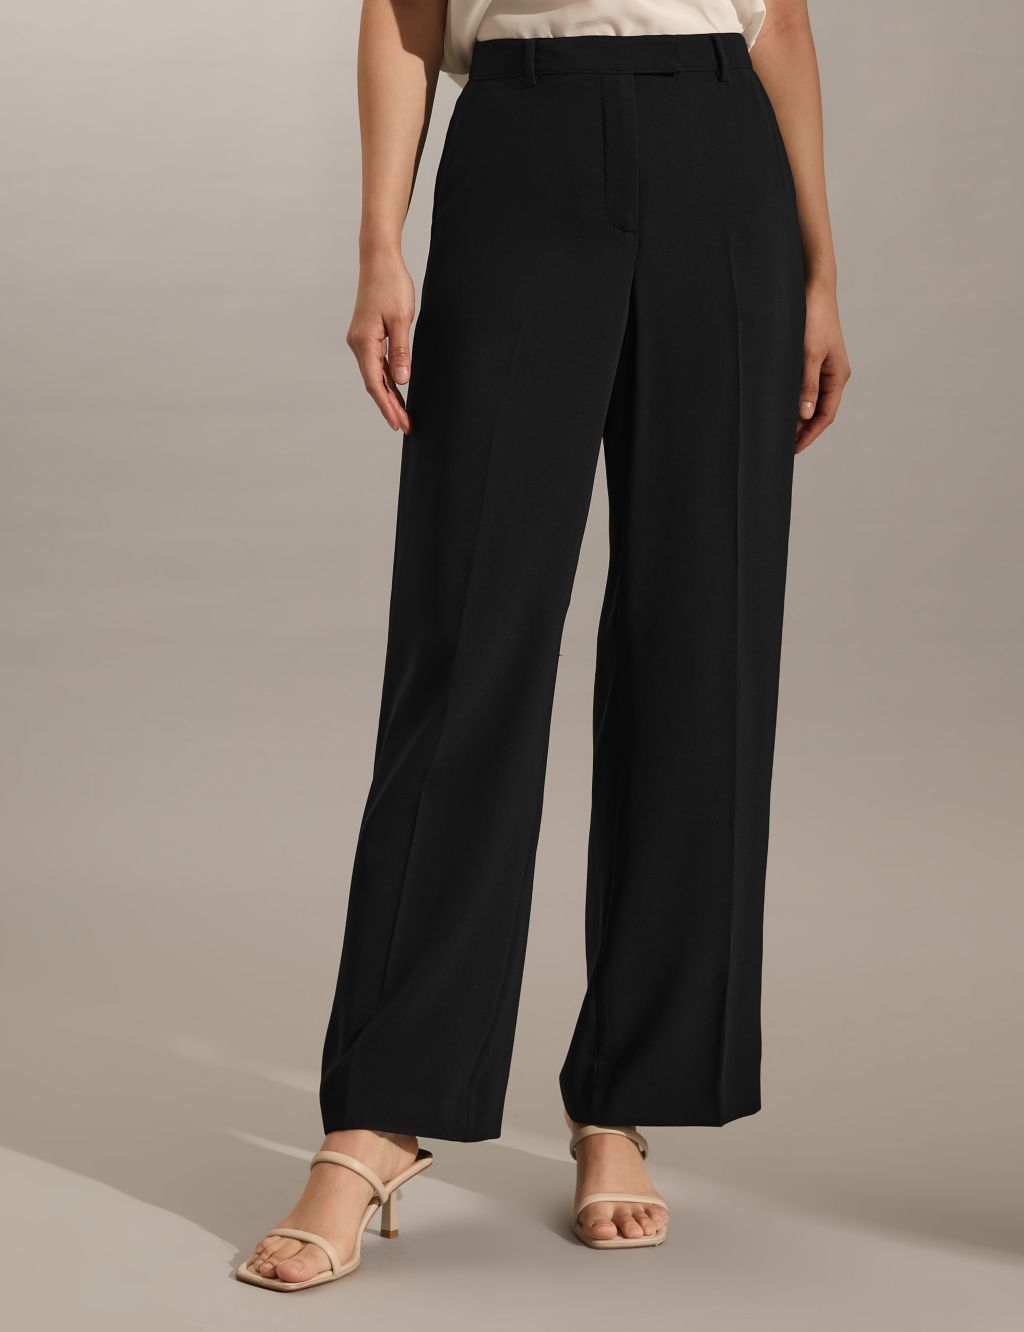 Crepe Wide Leg Trousers image 2